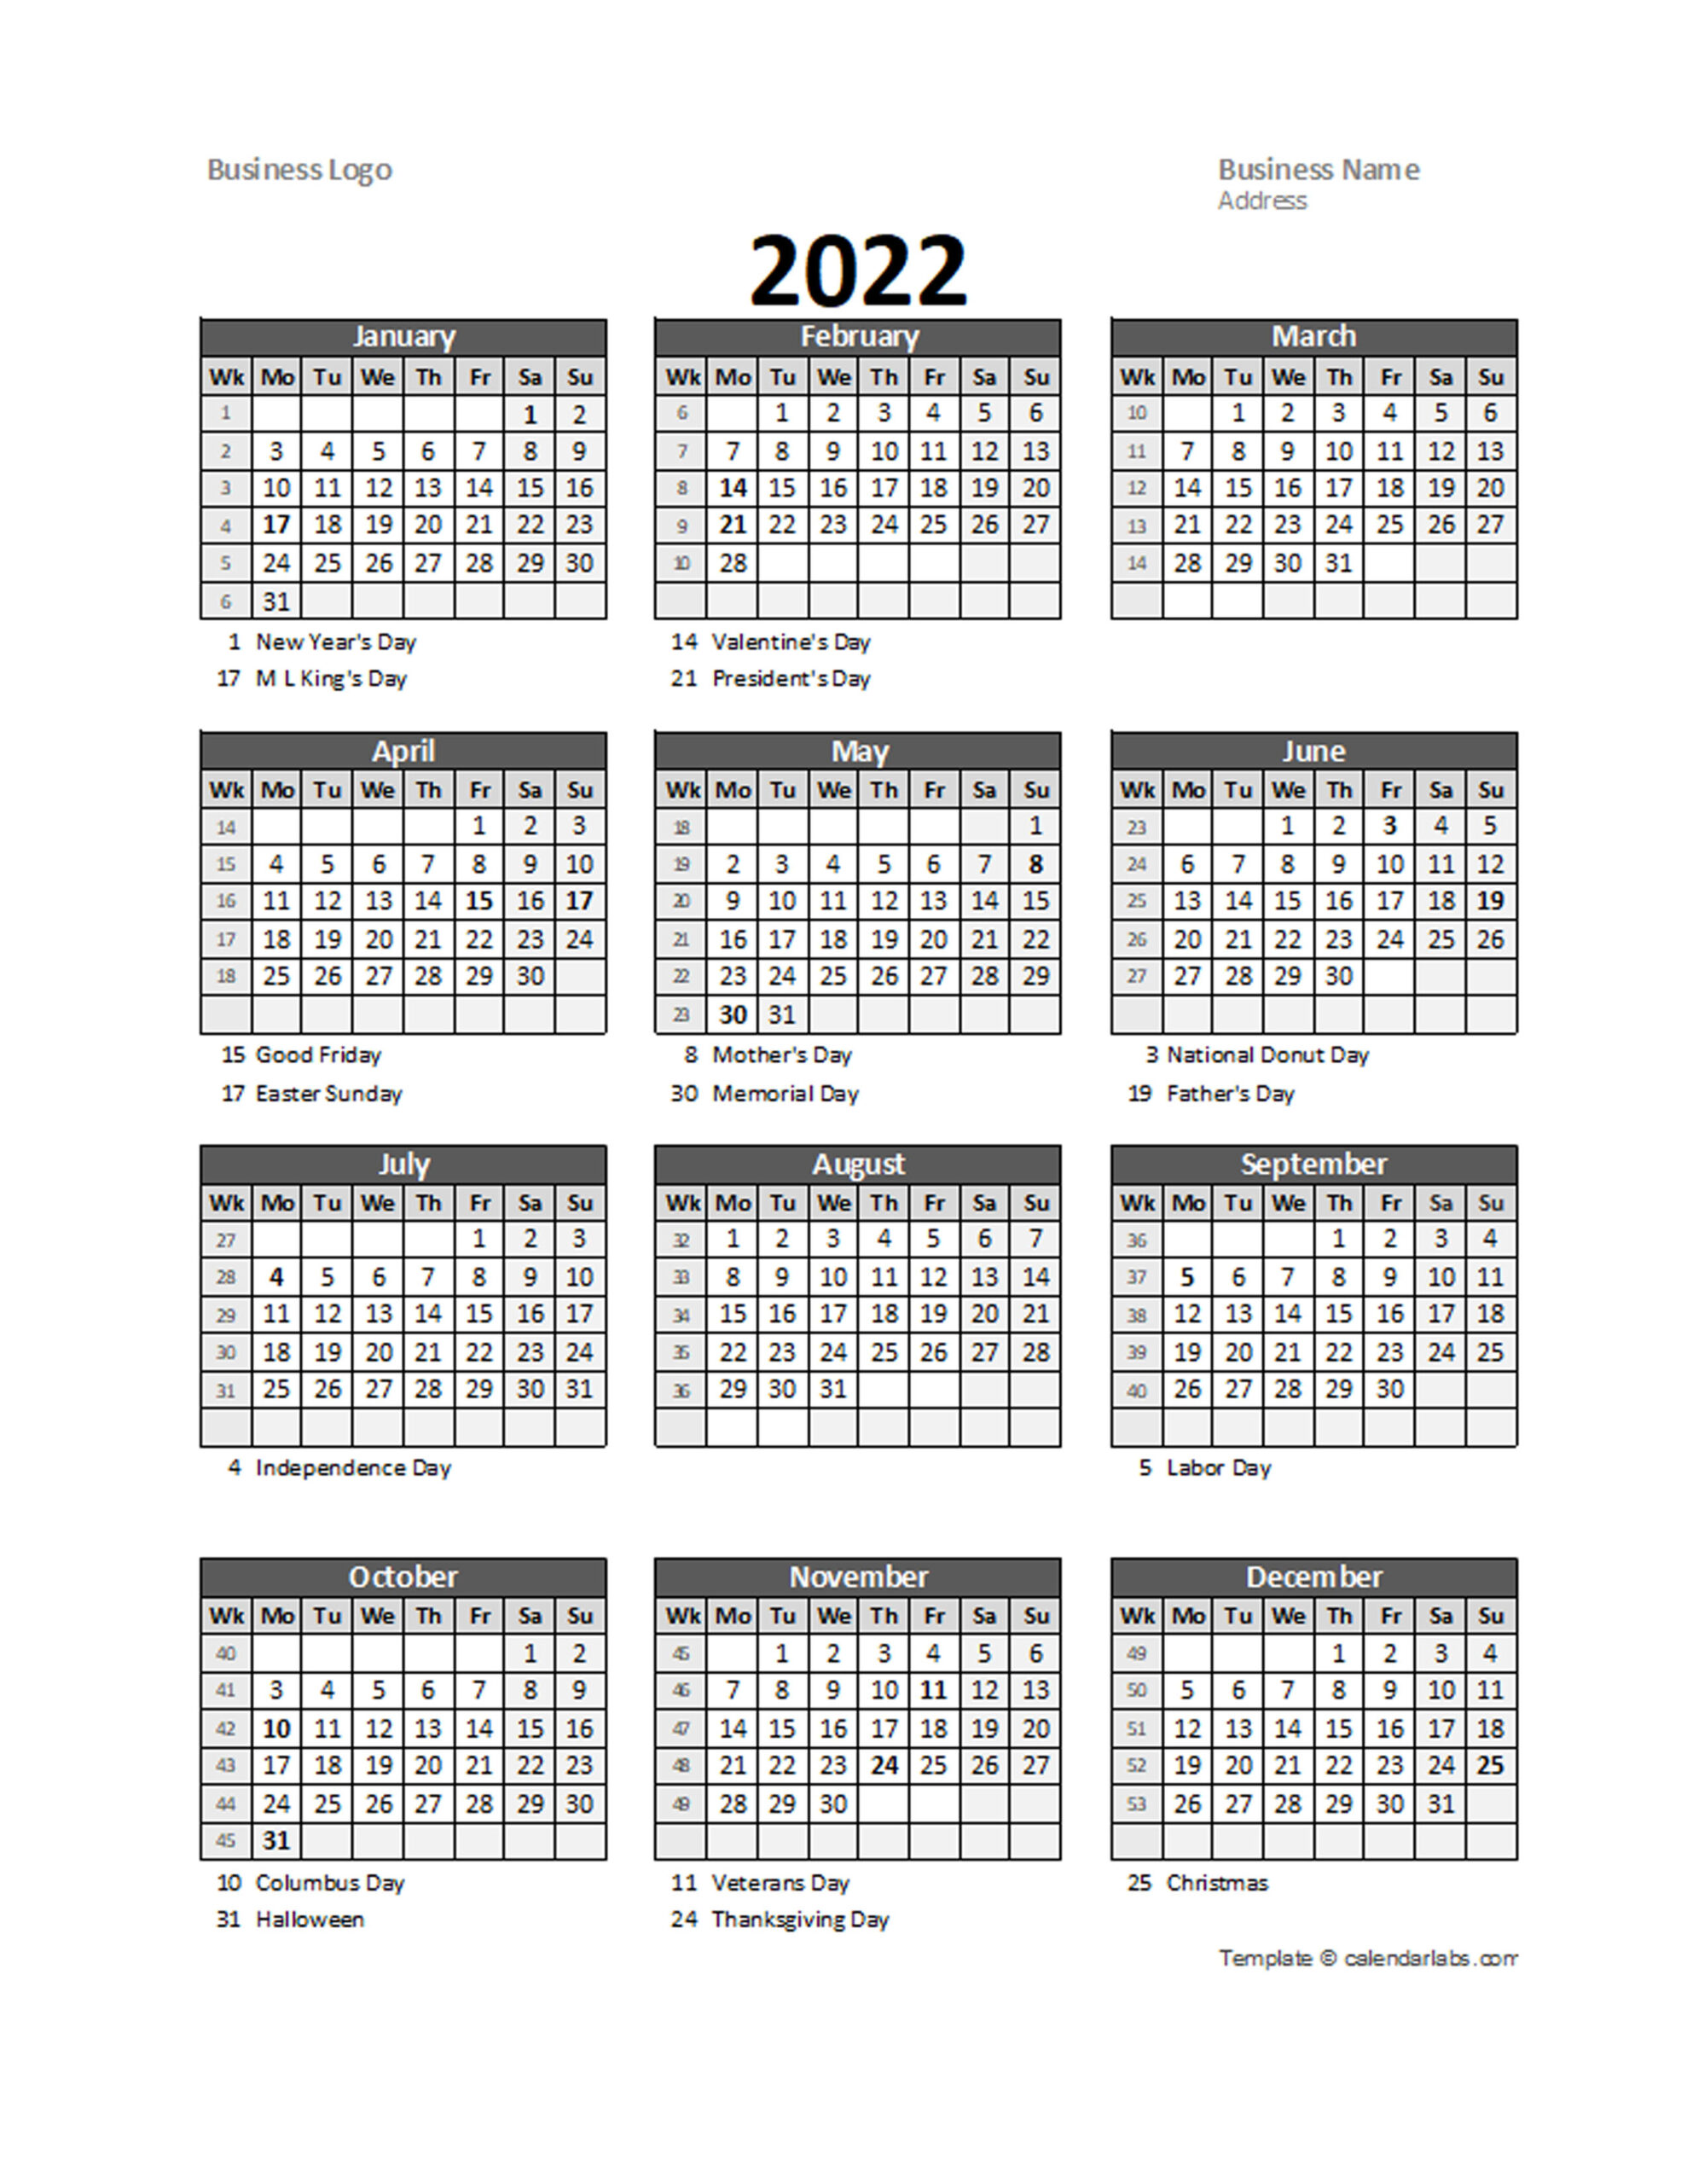 2022 Yearly Business Calendar With Week Number  Free Printable Templates intended for Free Printable Fiscal Year 2022 Calendar